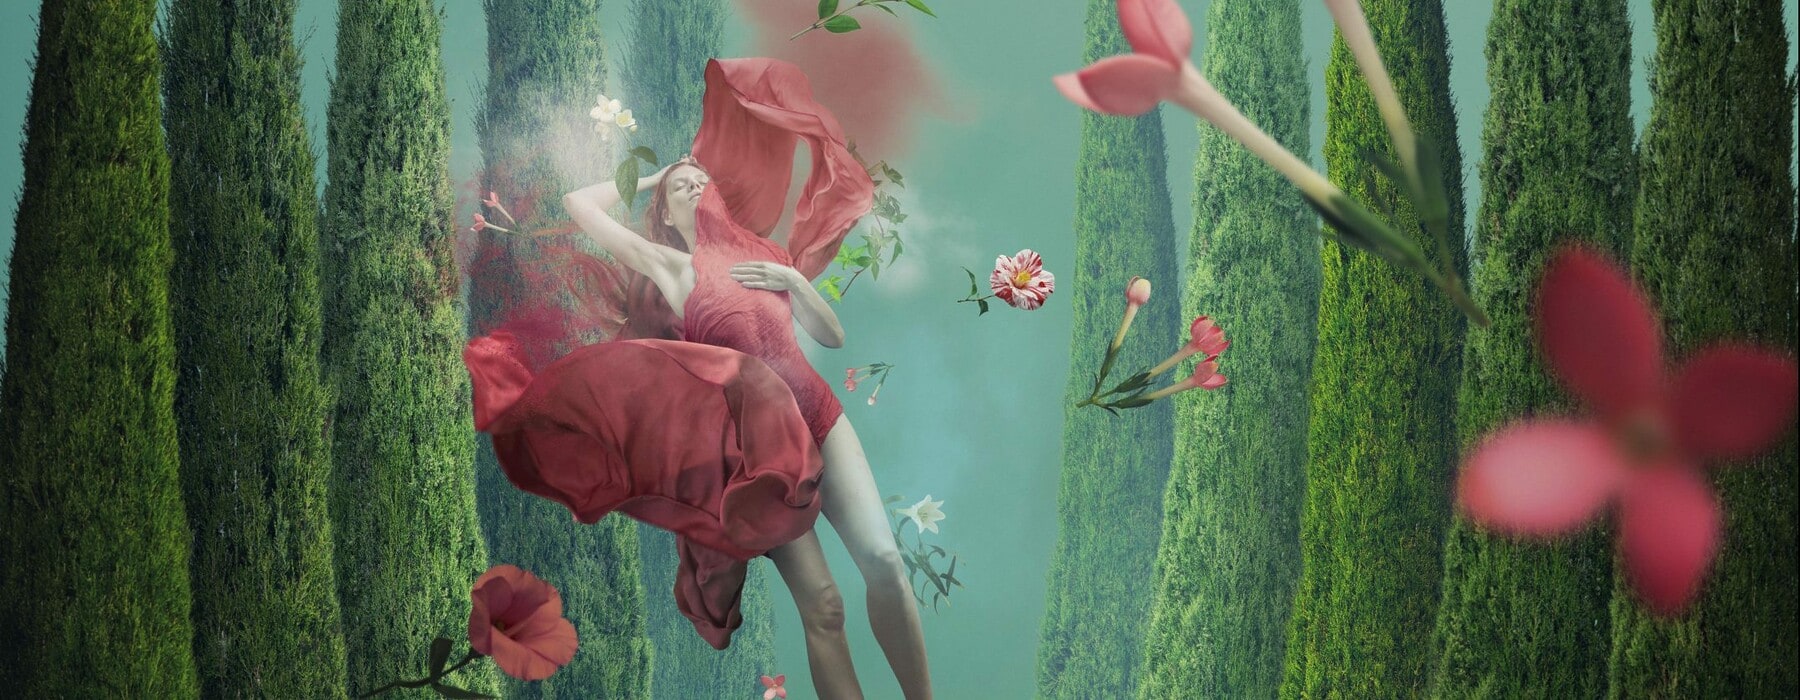 Woman wearing red dress floating in an underwater dream scene of forests and red flowers